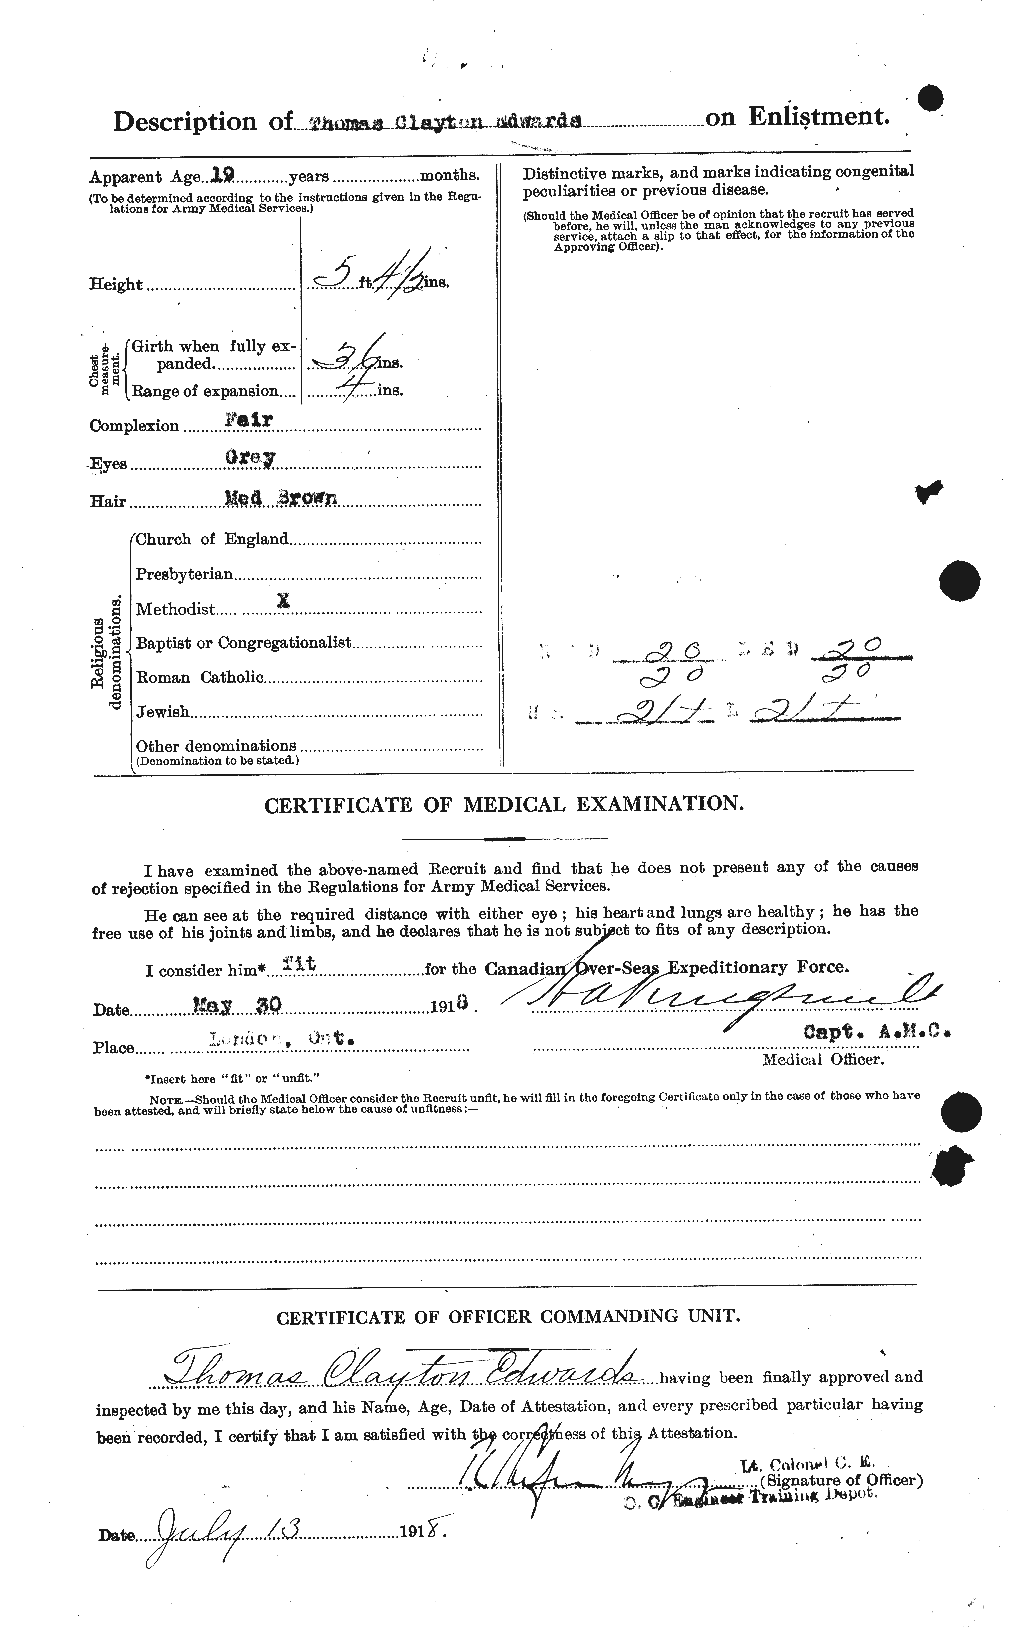 Personnel Records of the First World War - CEF 310341b